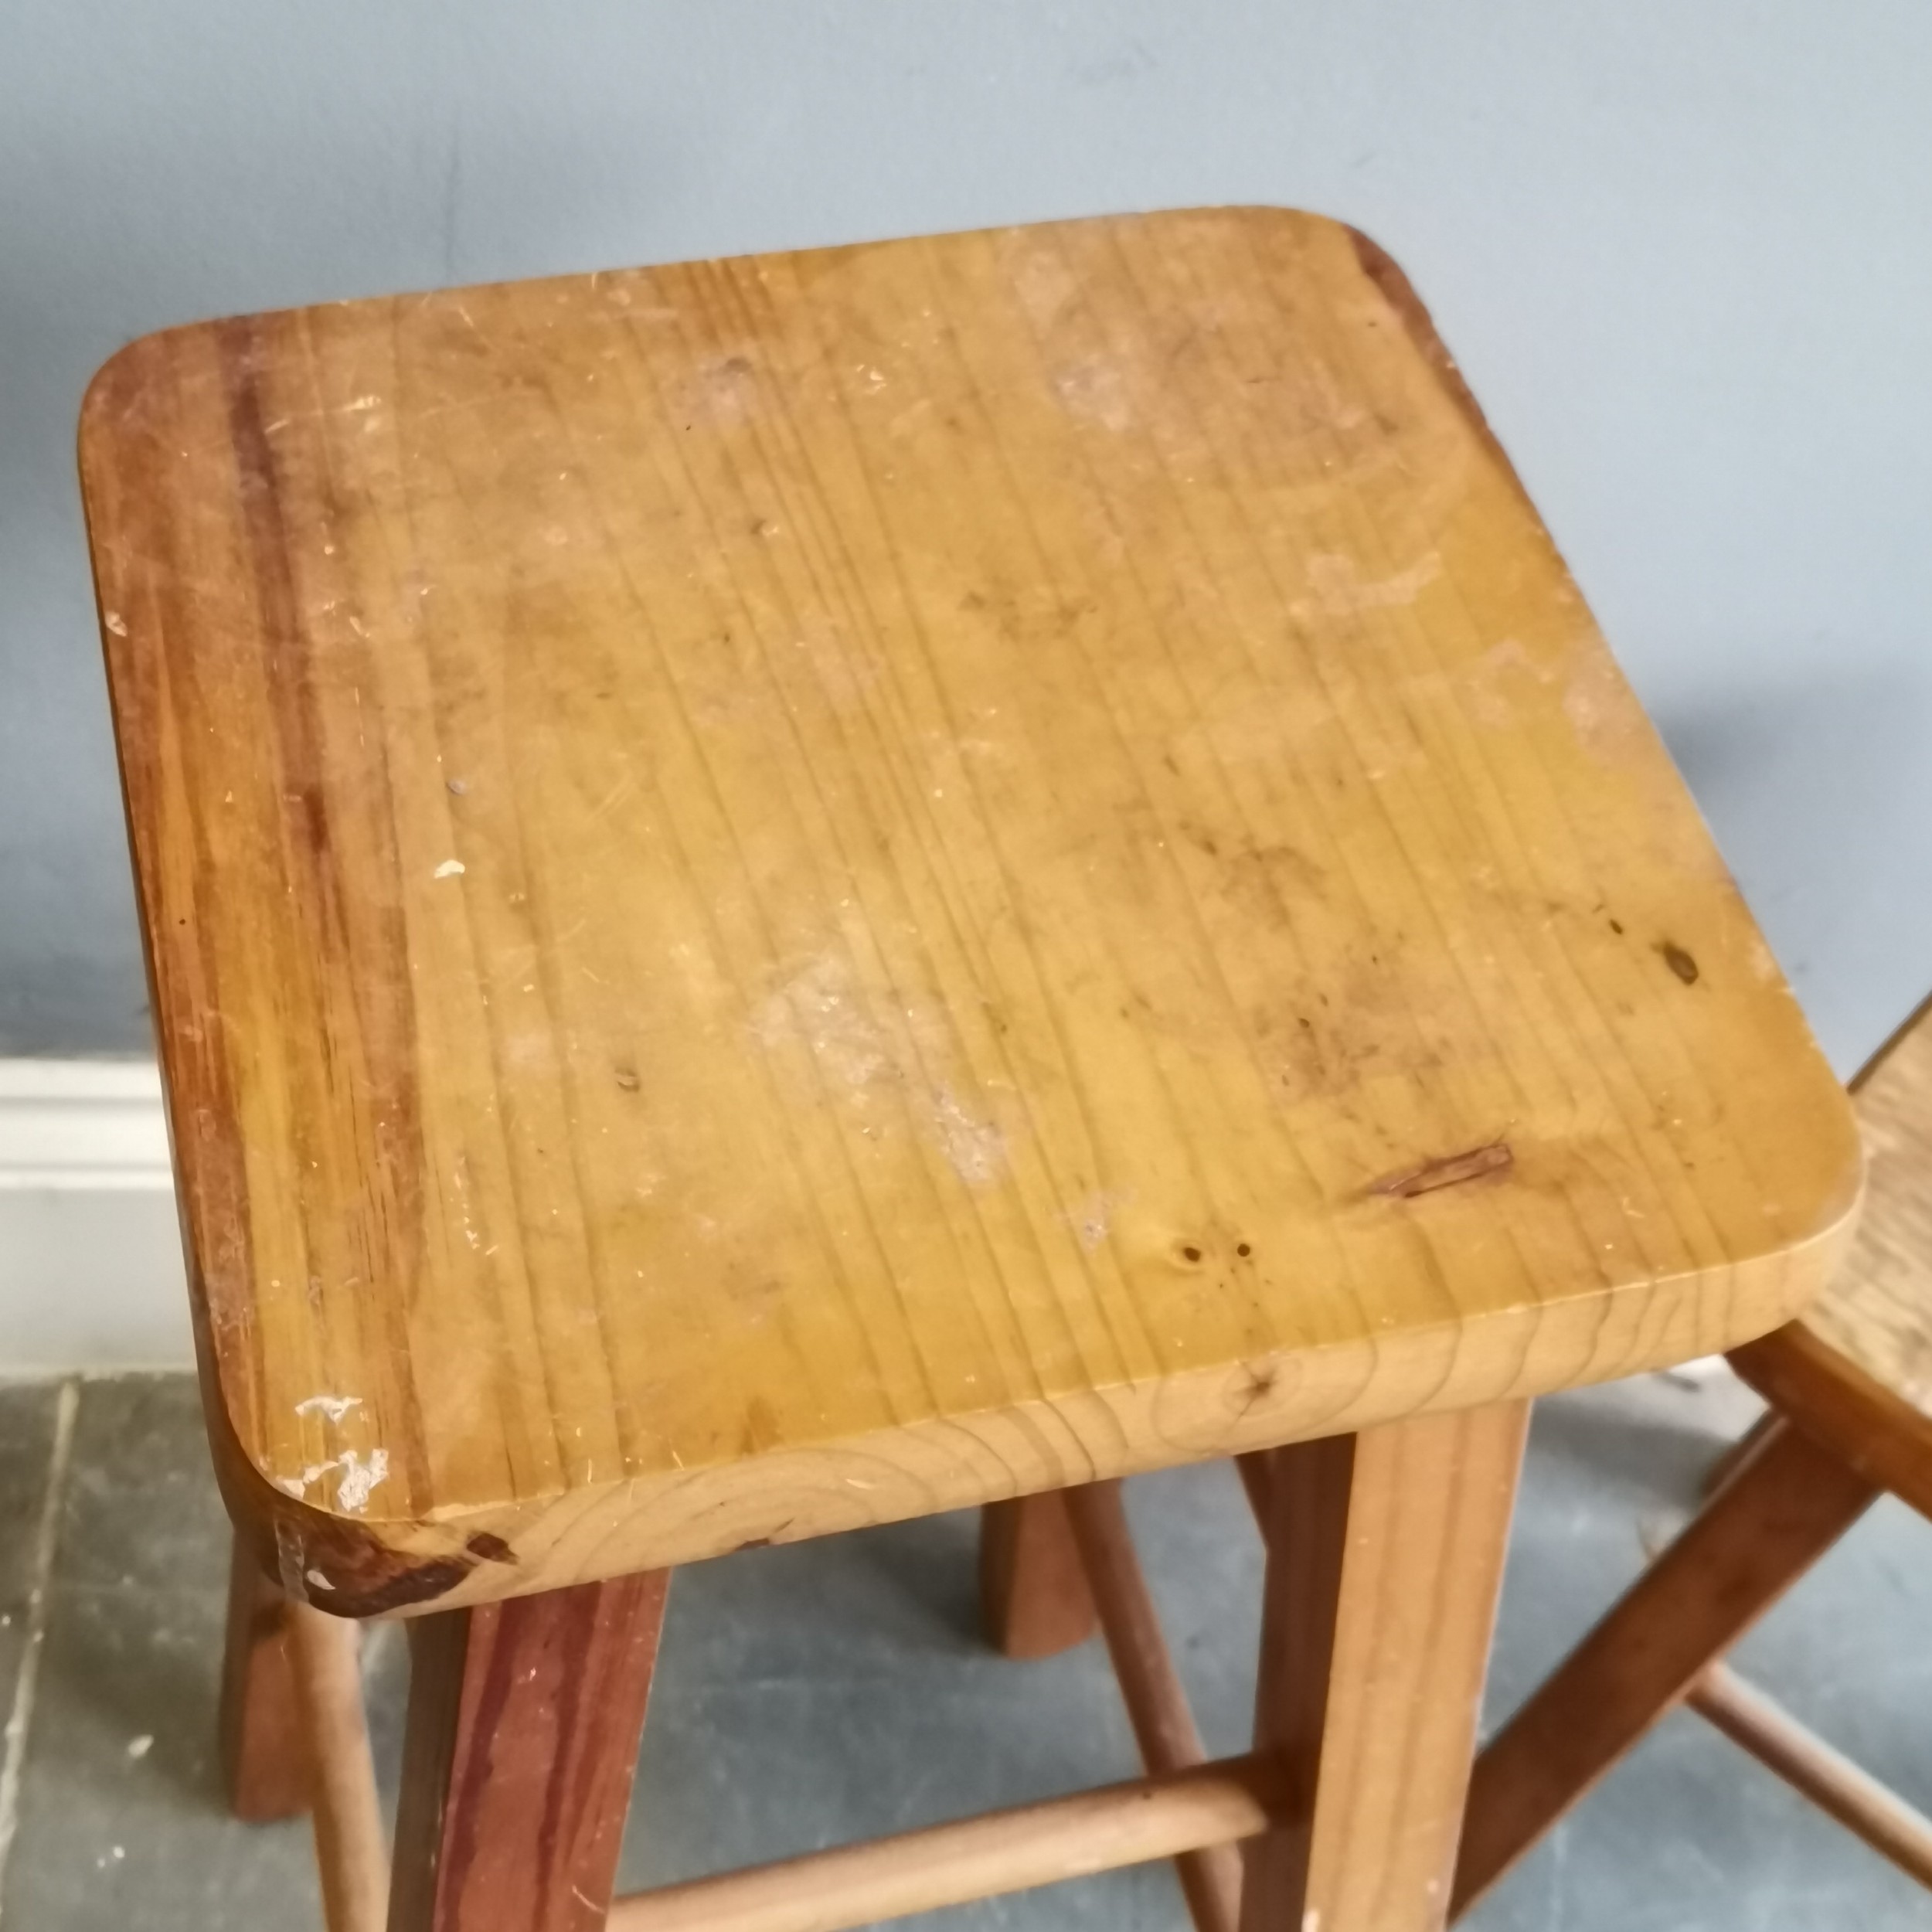 Vintage pine stool 68cm high x 32cm at widest point, t/w similar but smaller 46cm high x 30cm at - Image 2 of 2